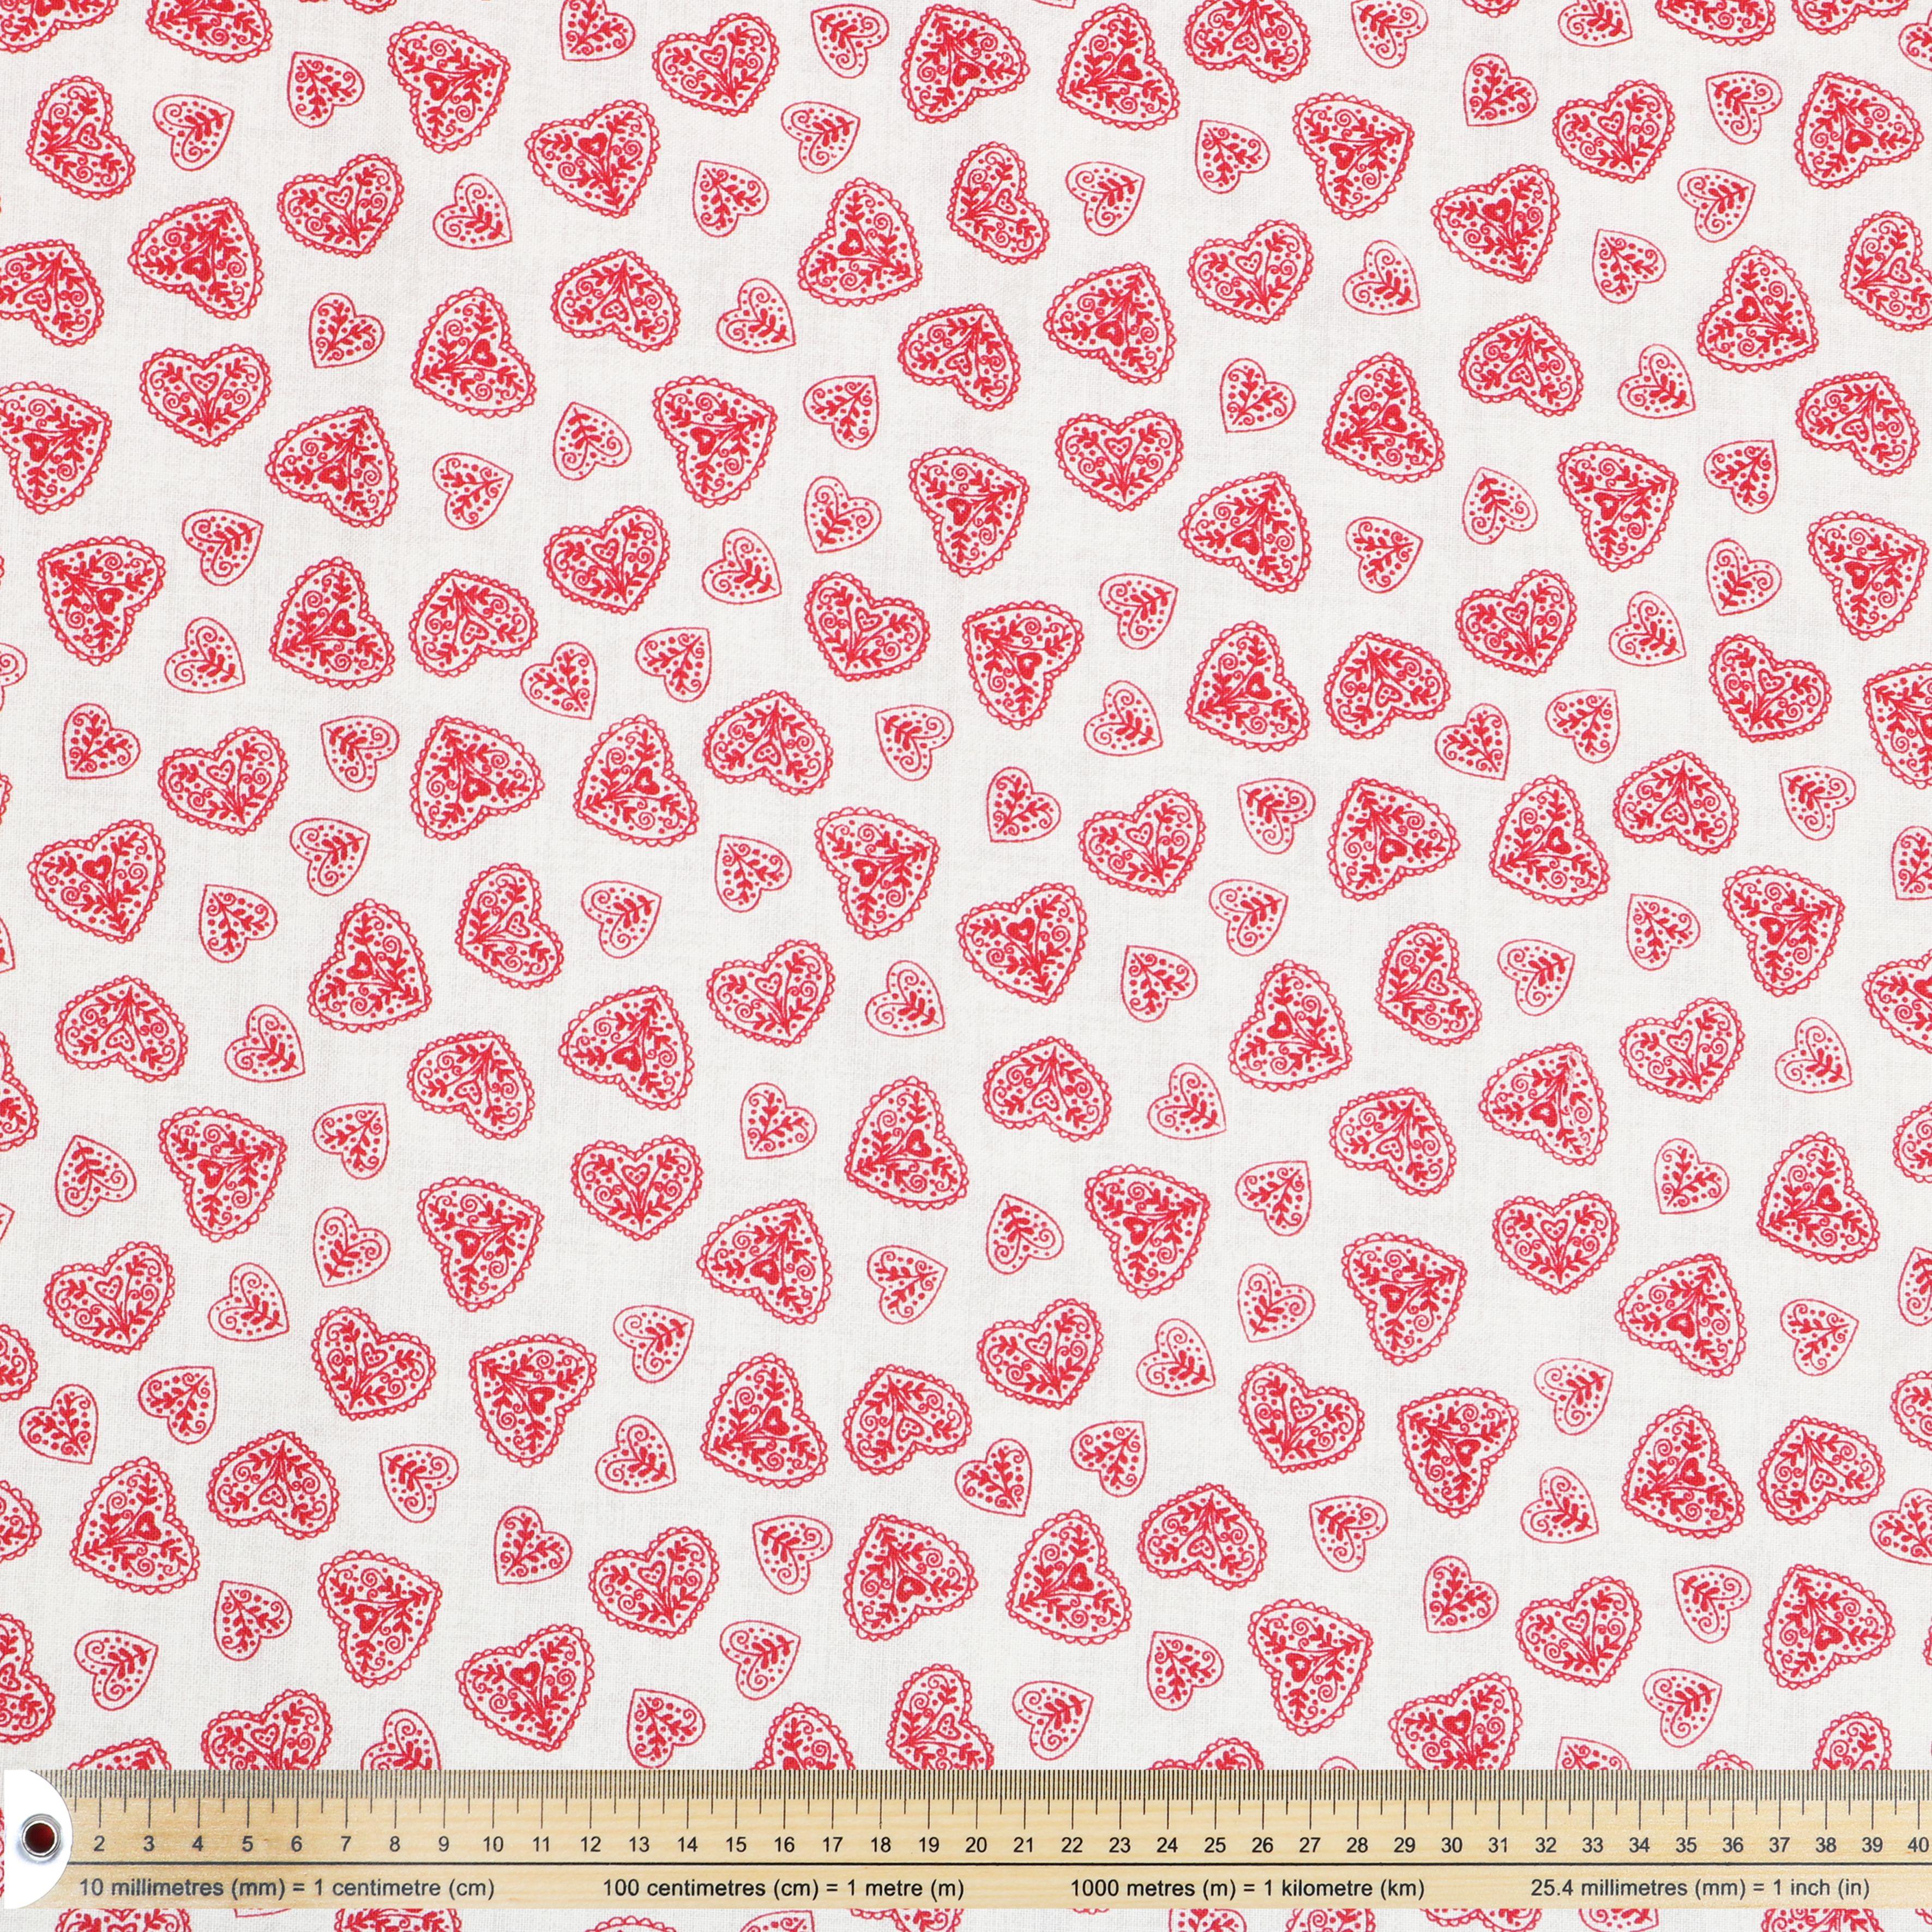 White Background with Red M Logo - Scandi 4 Red Hearts on White Background Fabric by Makower. 0.5m